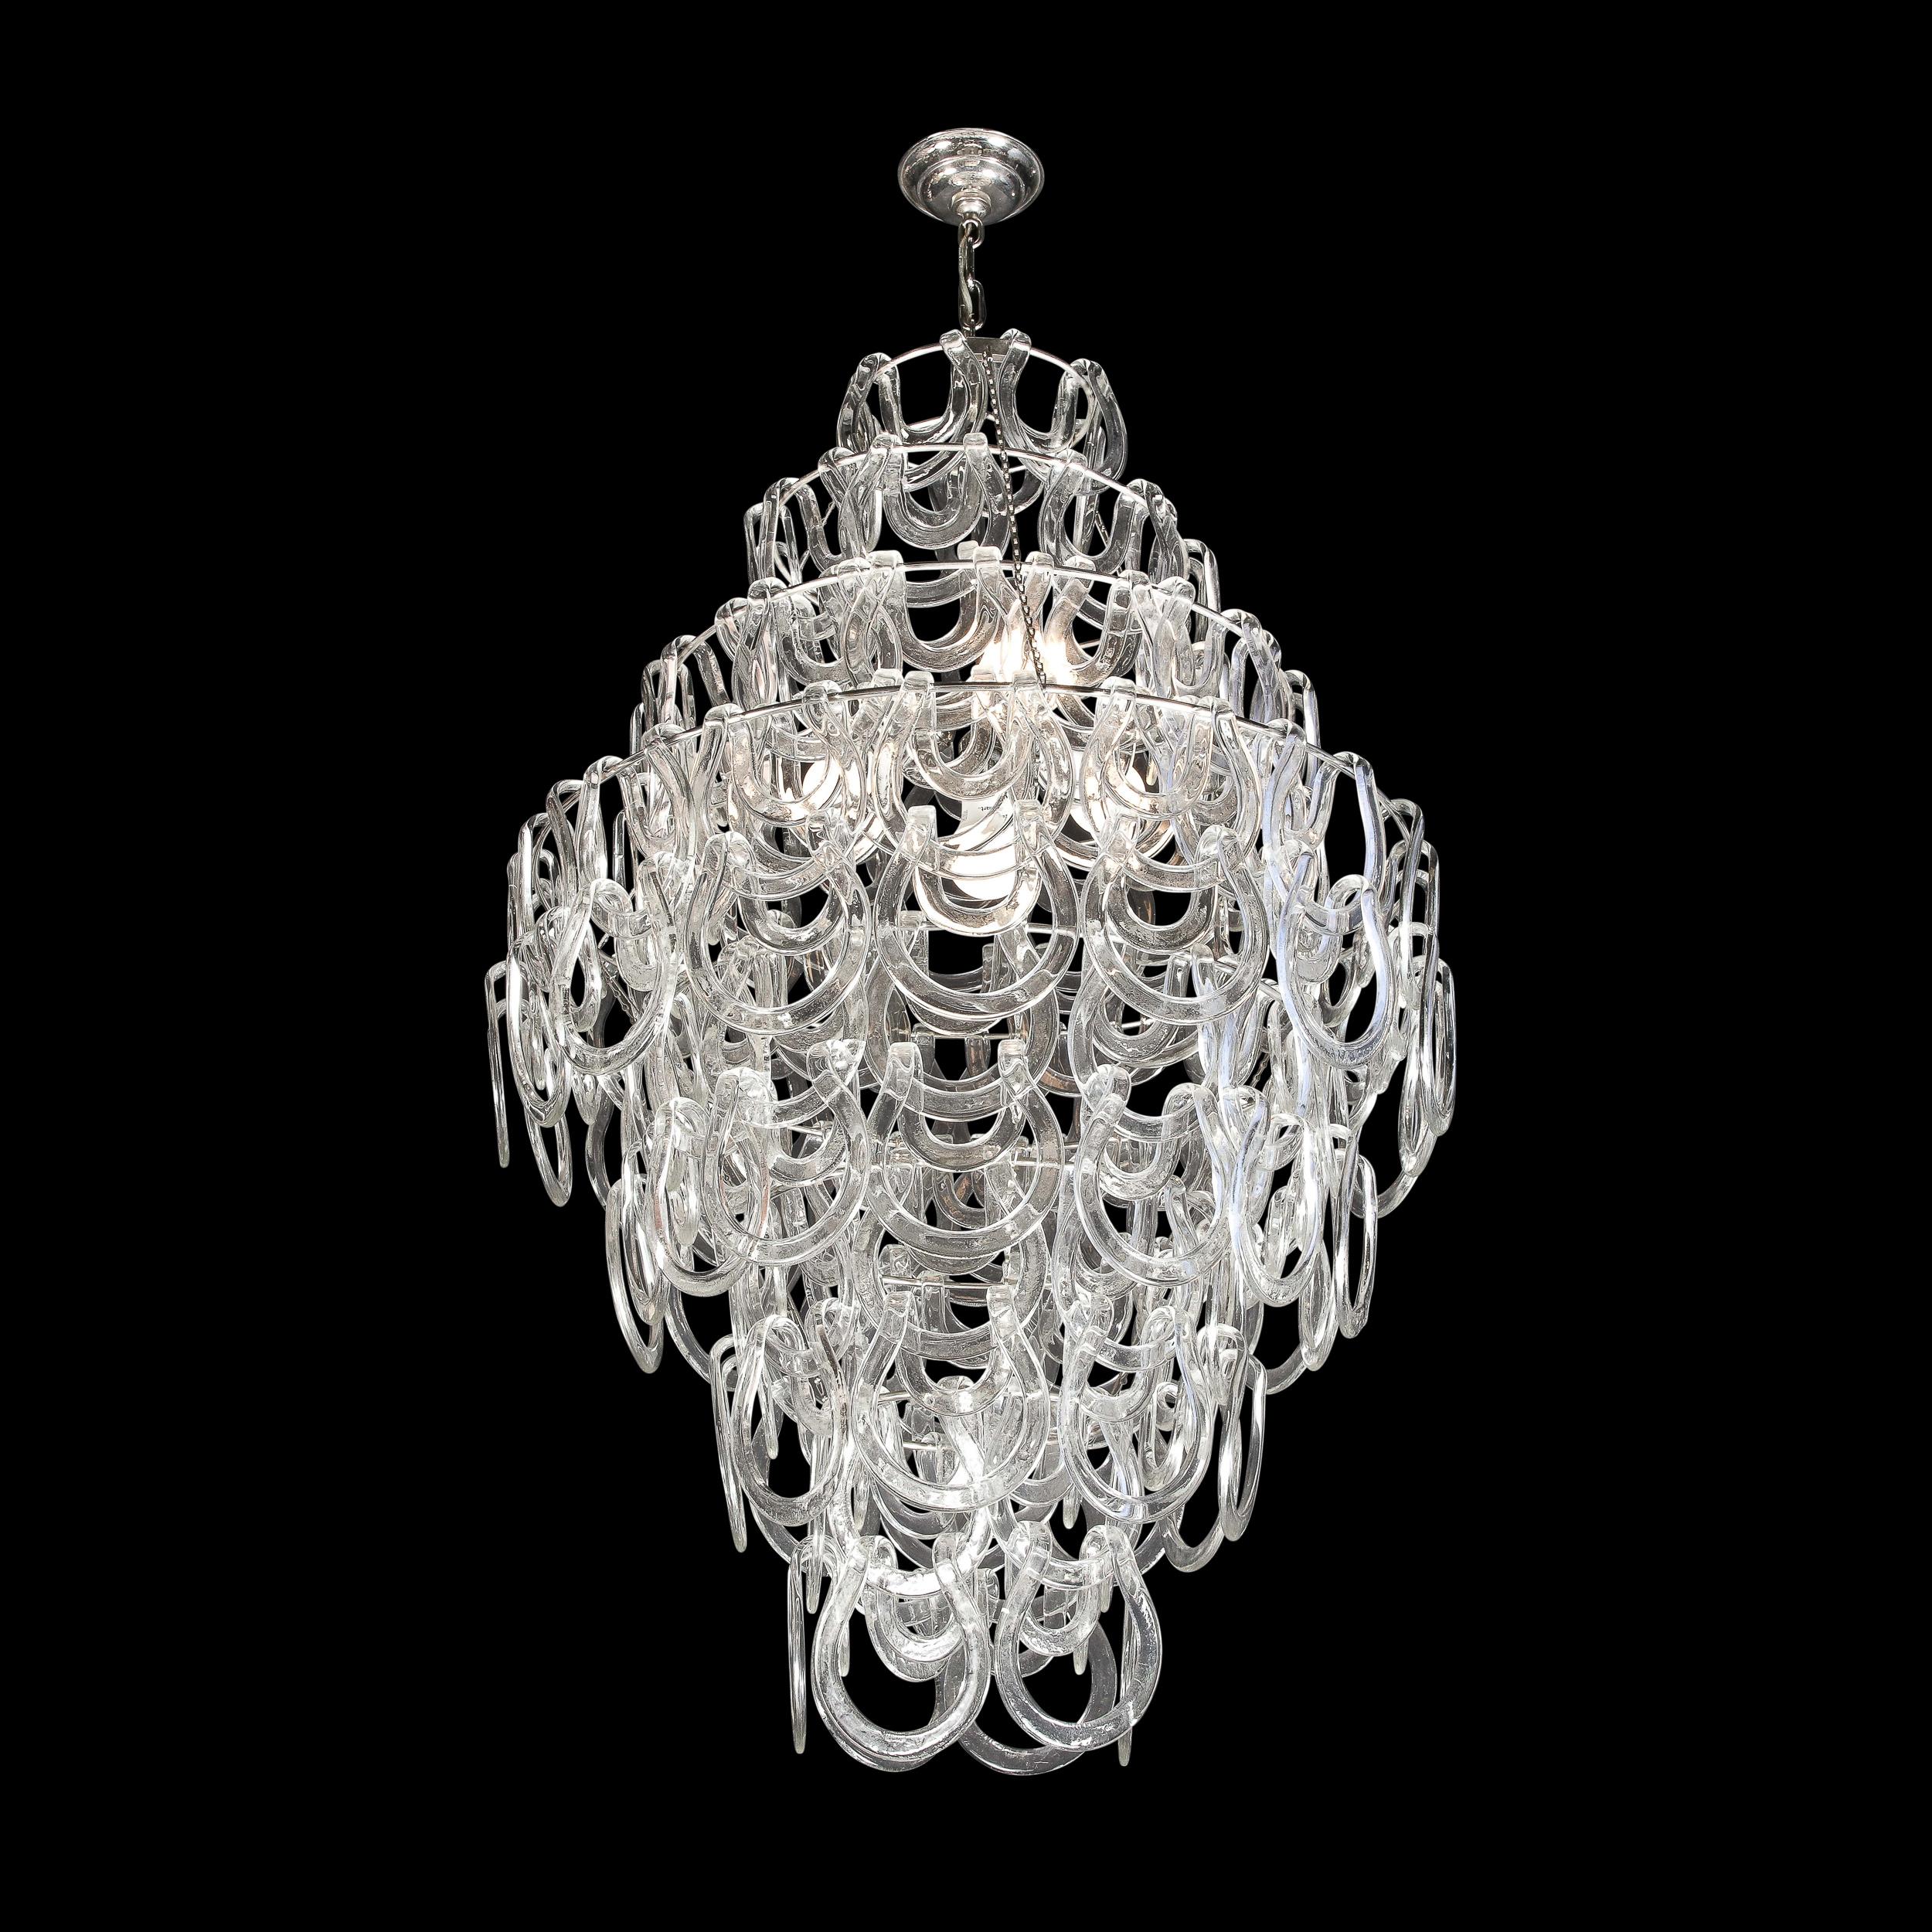 This elegant and sophisticated Giogali 'Link' Chandelier was realized by the legendary designer Angelo Mangiarotti for Vistosi, circa 1960. Created in Murano, Italy- the island off the coast of Venice renowned for centuries for its superlative glass